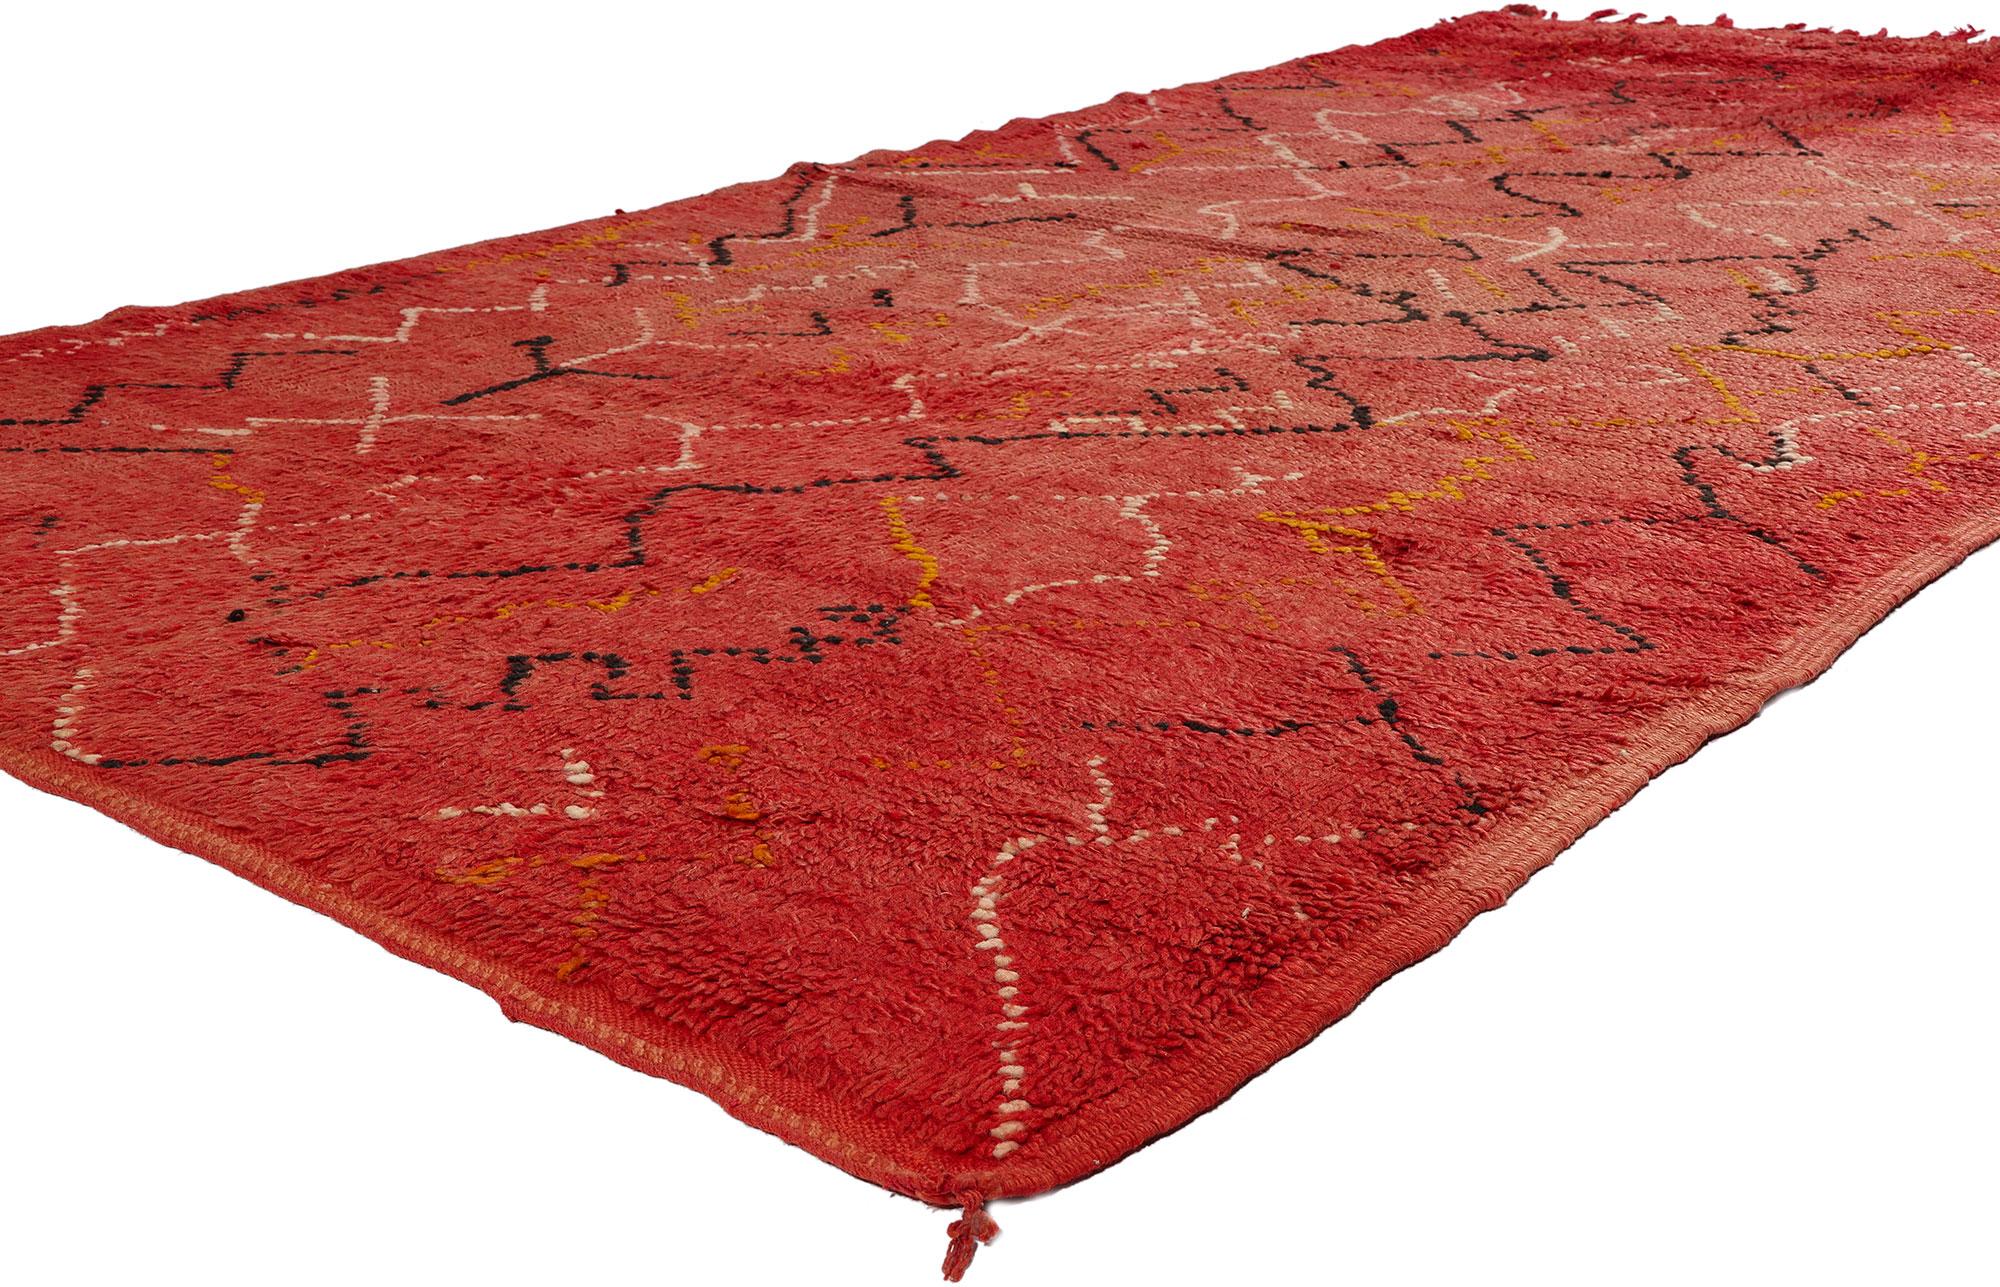 21825 Vintage Red Talsint Moroccan Rug, 05'01 x 09'10. Embark on a mesmerizing journey with the beguiling artistry woven into this hand-knotted wool vintage red Talsint Moroccan rug, a treasure that unfolds its tale from the mystical Figuig region